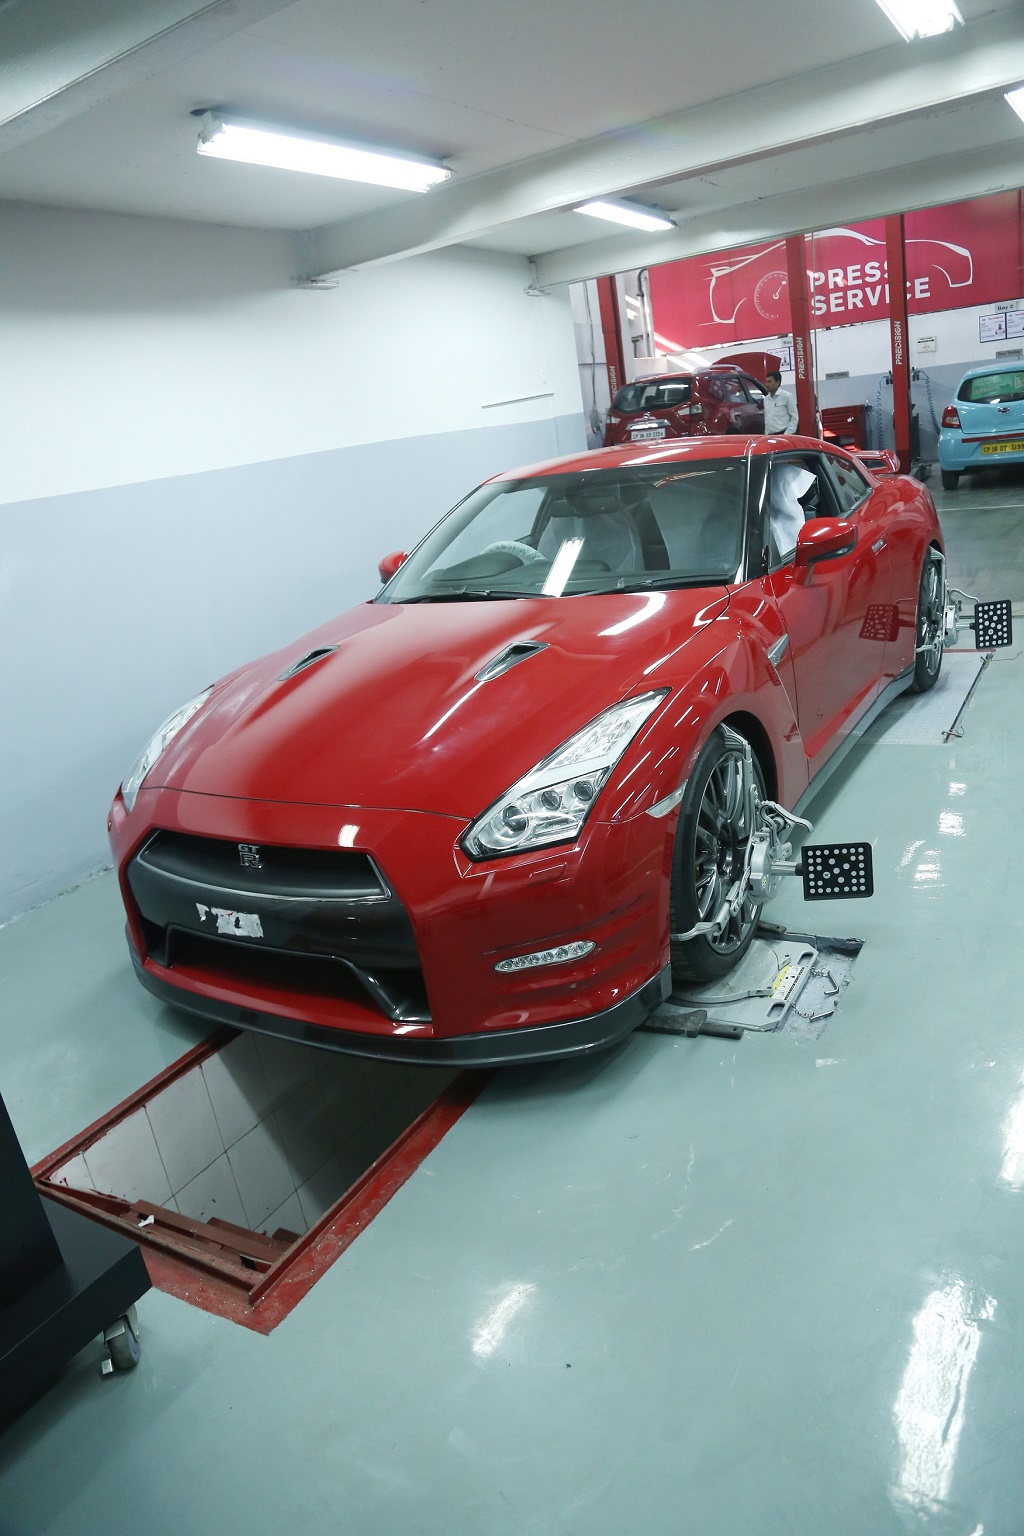 nissan-gt-r-on-alignment-bay